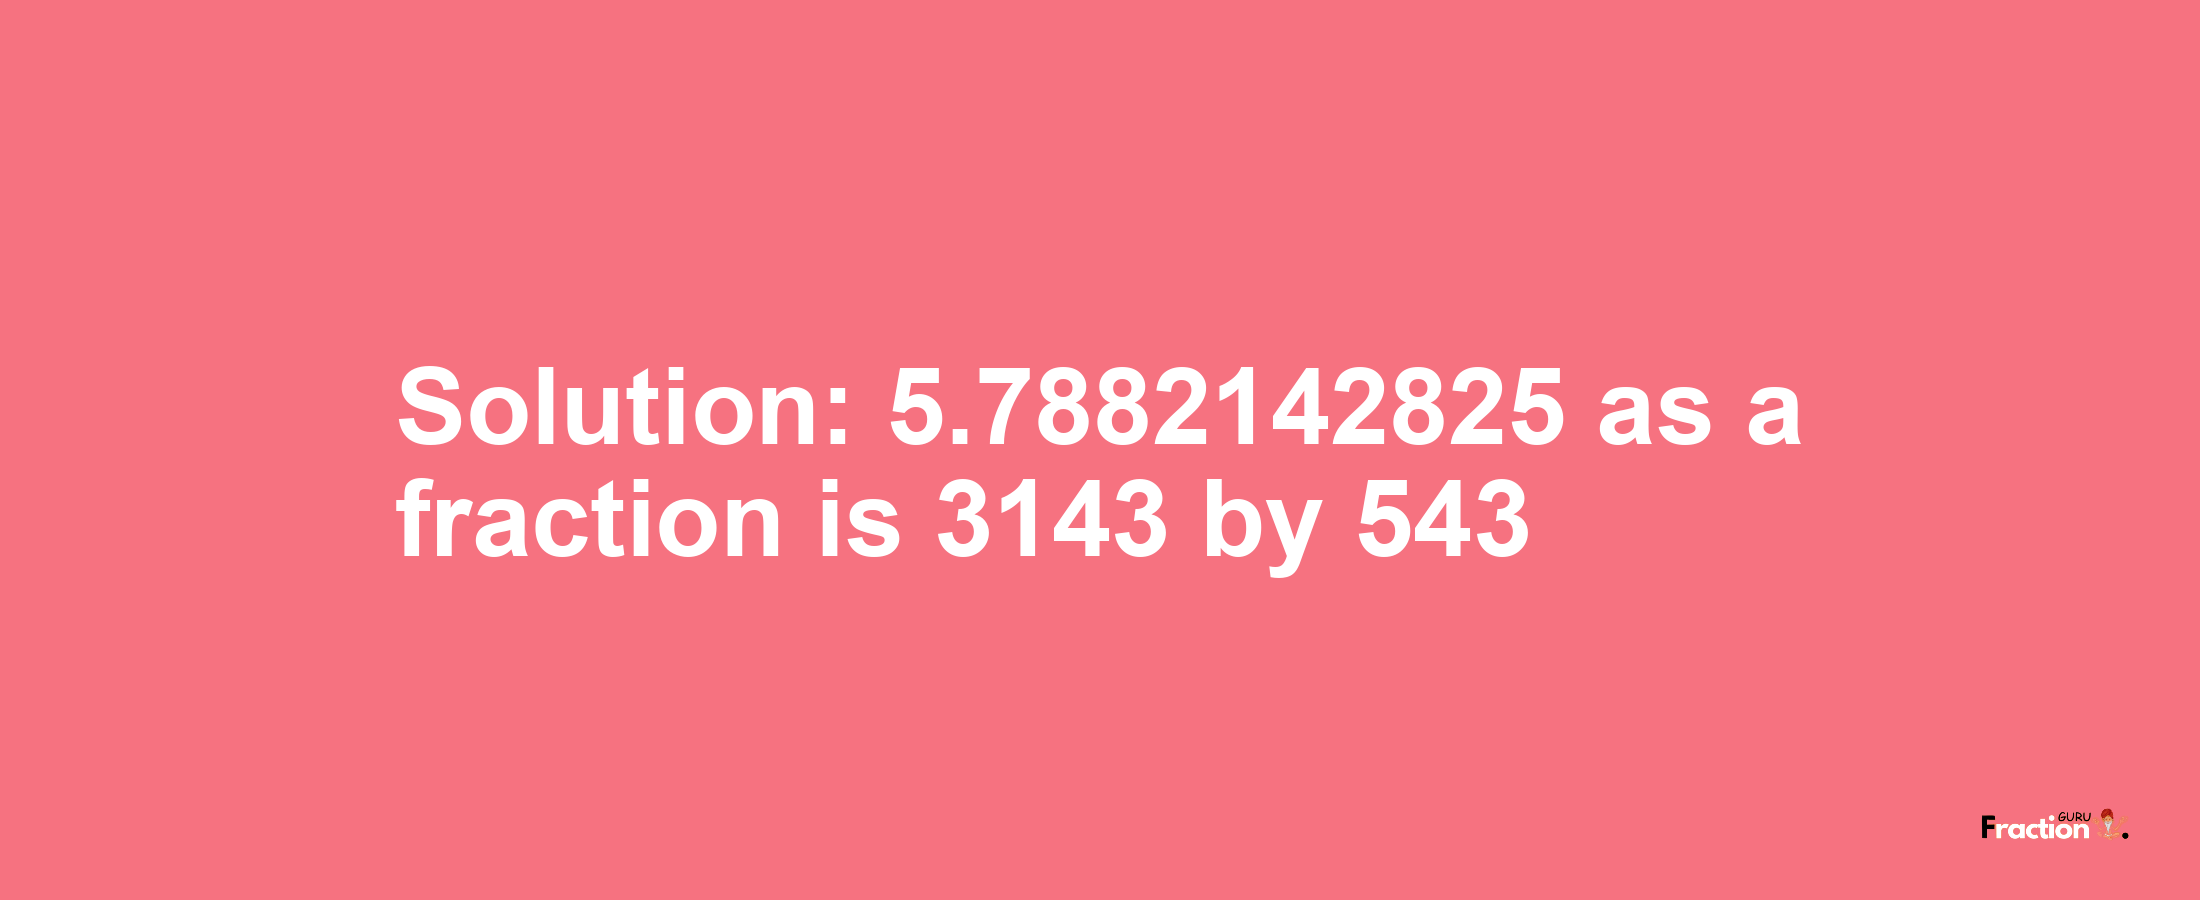 Solution:5.7882142825 as a fraction is 3143/543